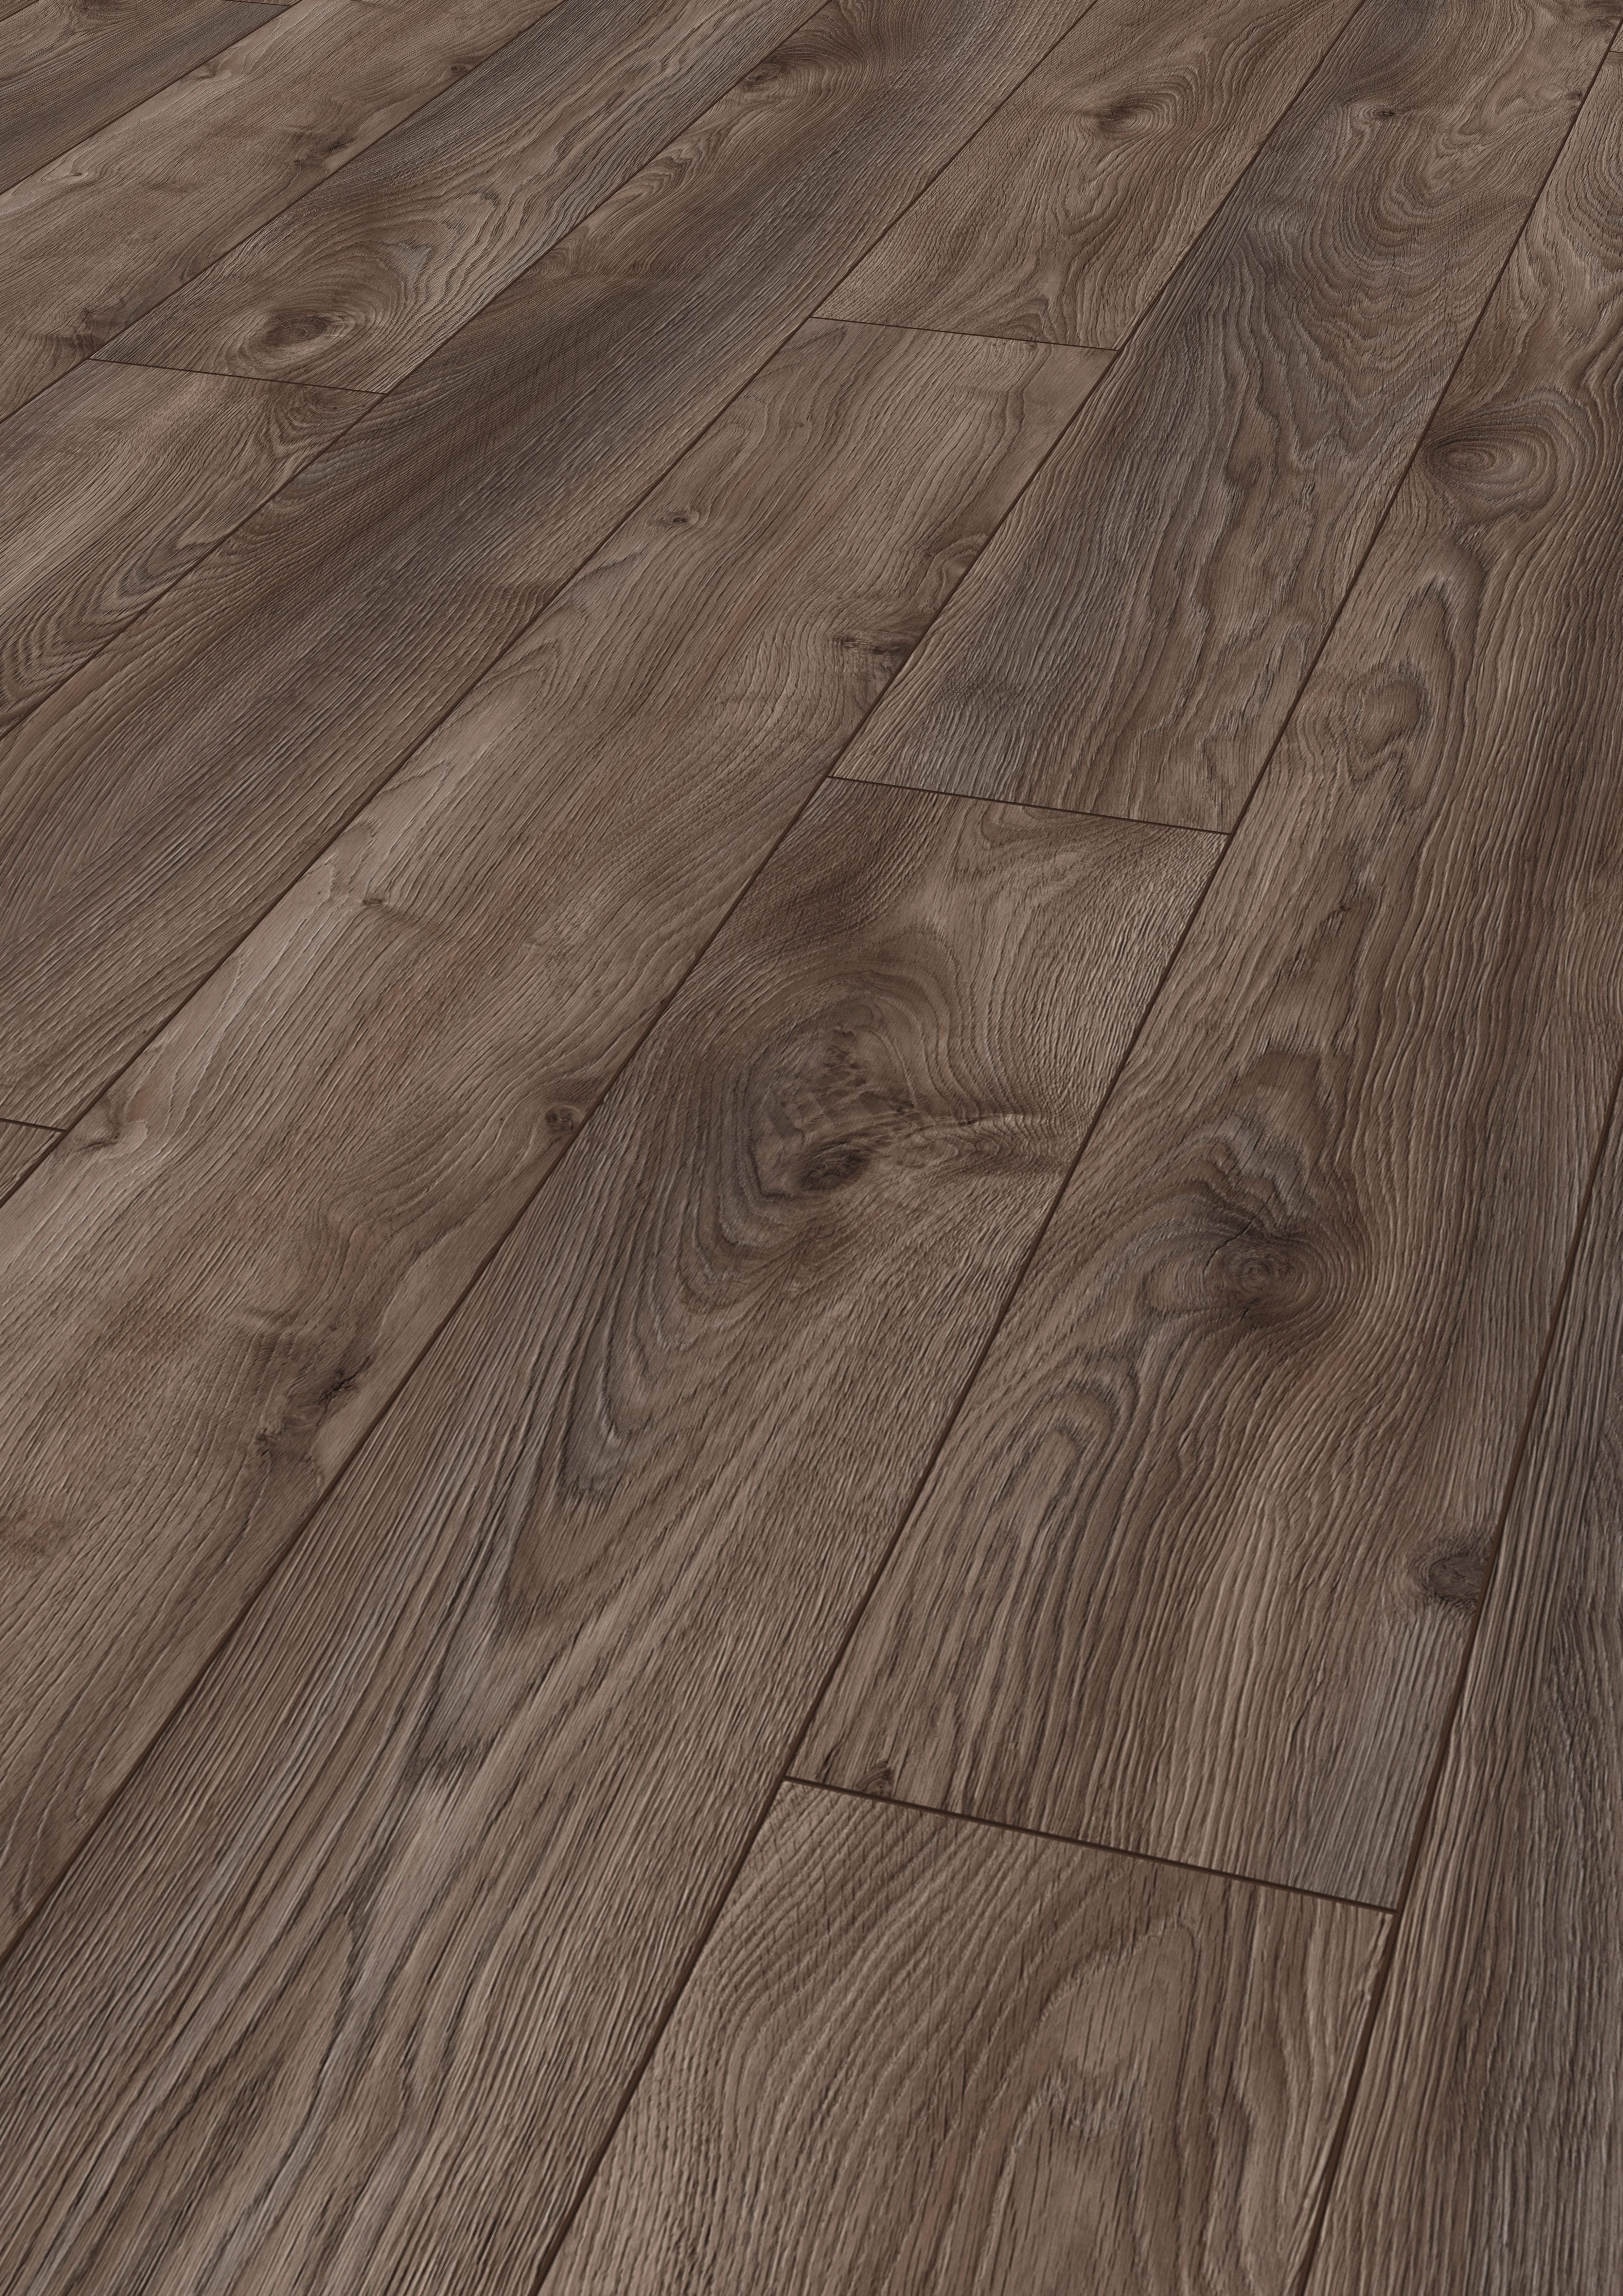 19 Great Hardwood Floor Colors 2017 2024 free download hardwood floor colors 2017 of mammut laminate flooring in country house plank style kronotex regarding download picture amp